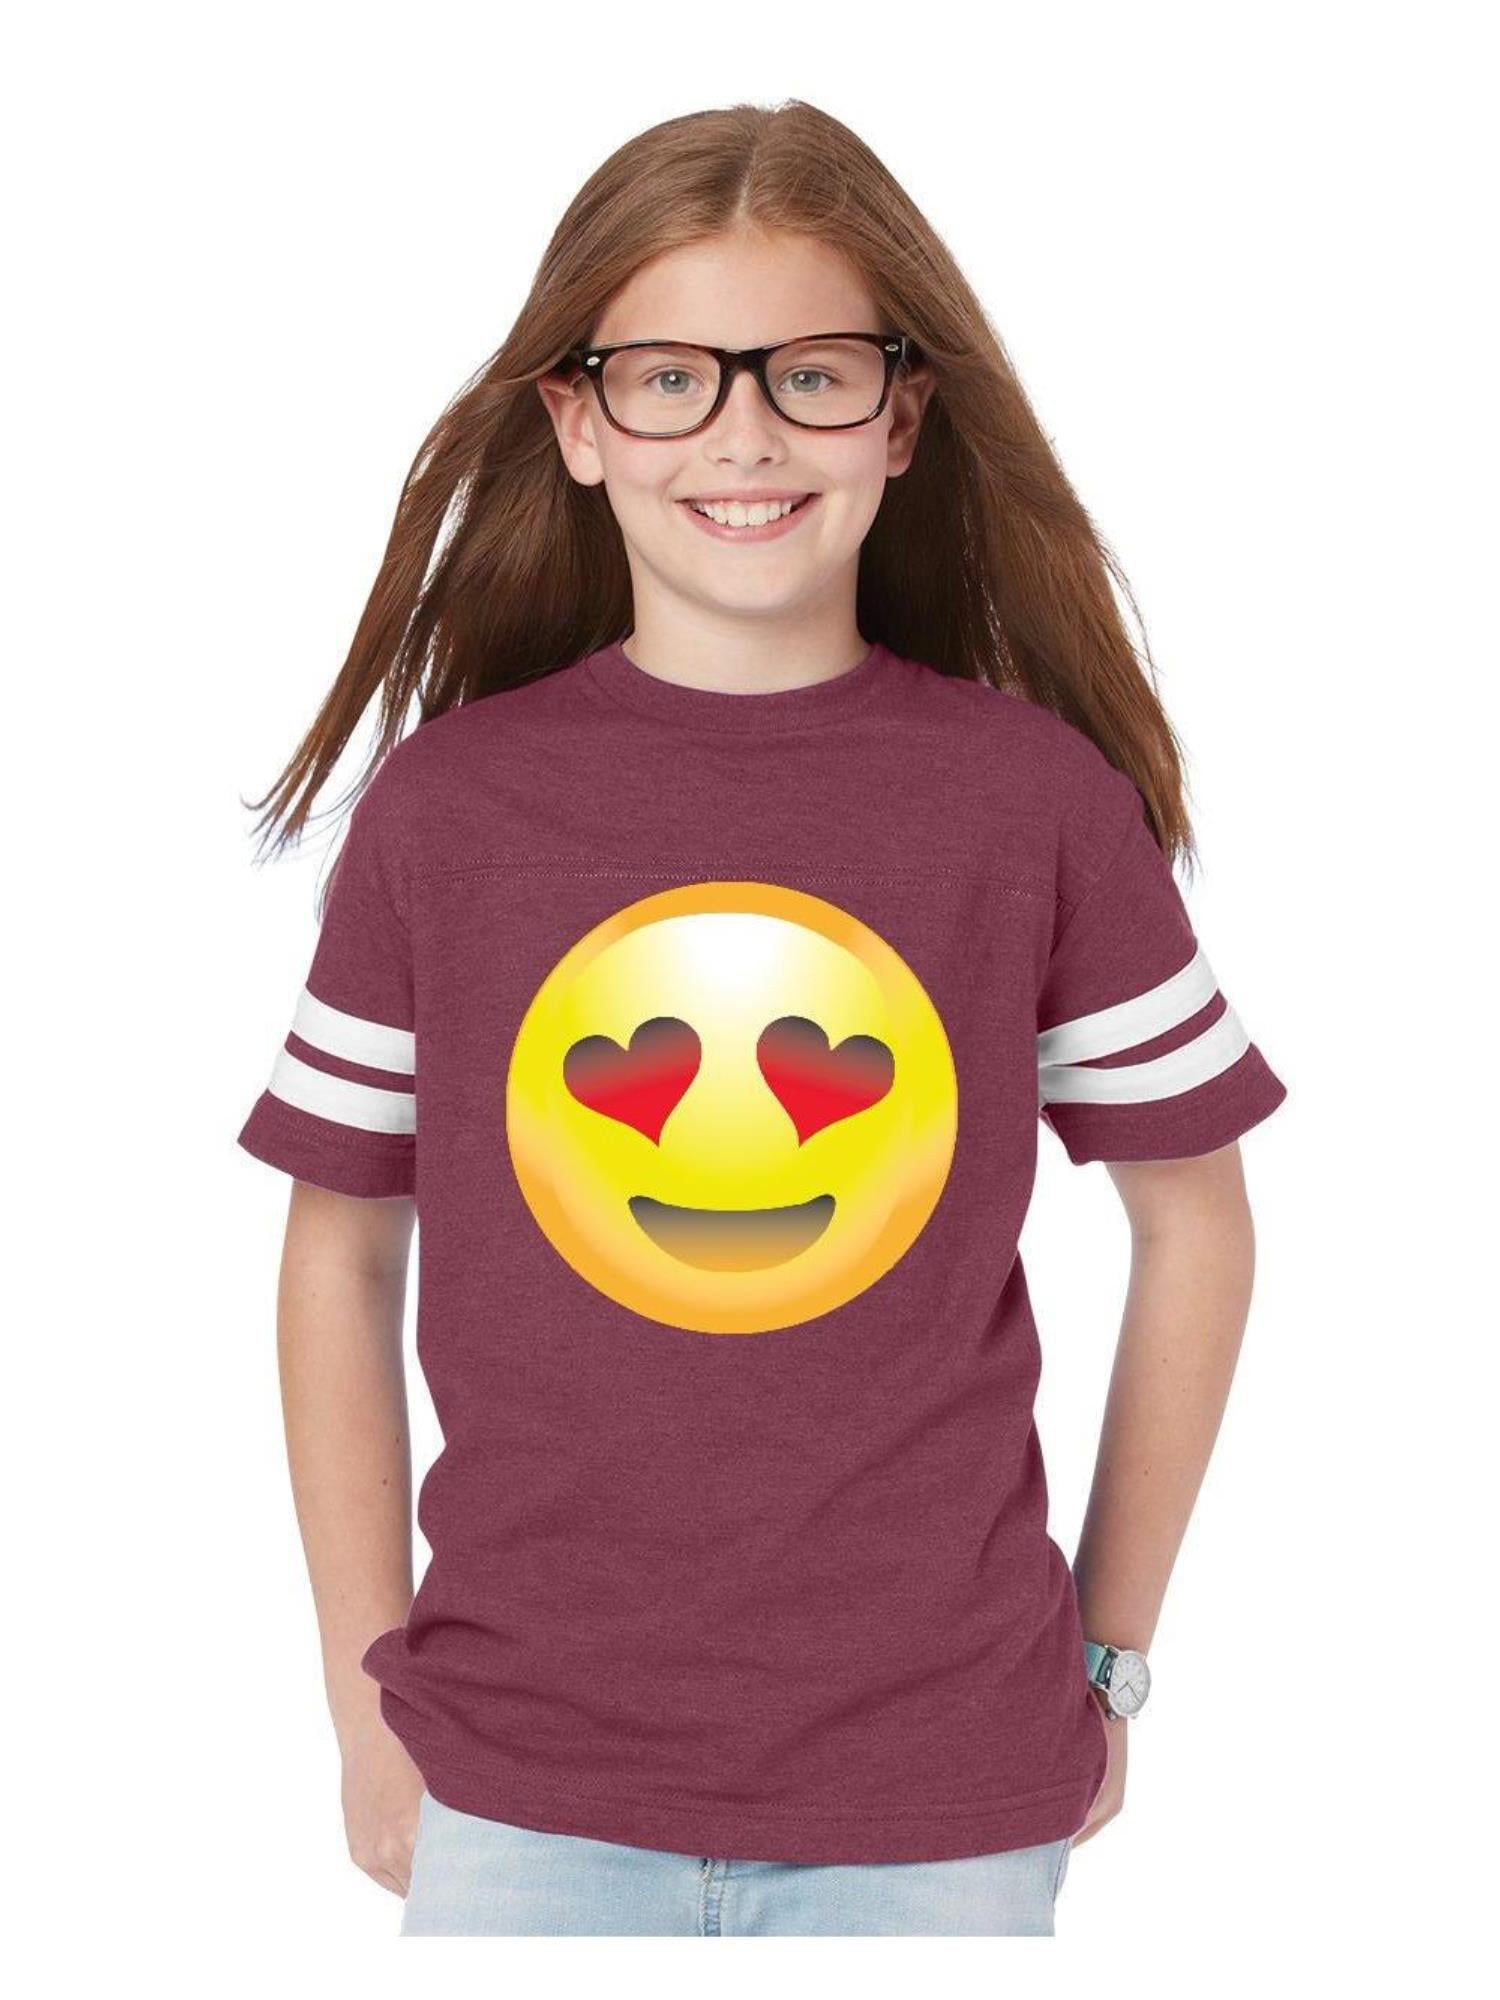 IWPF - Youth Emoji Smiling Face Heart-Shaped Eyes Football Fine Jersey ...